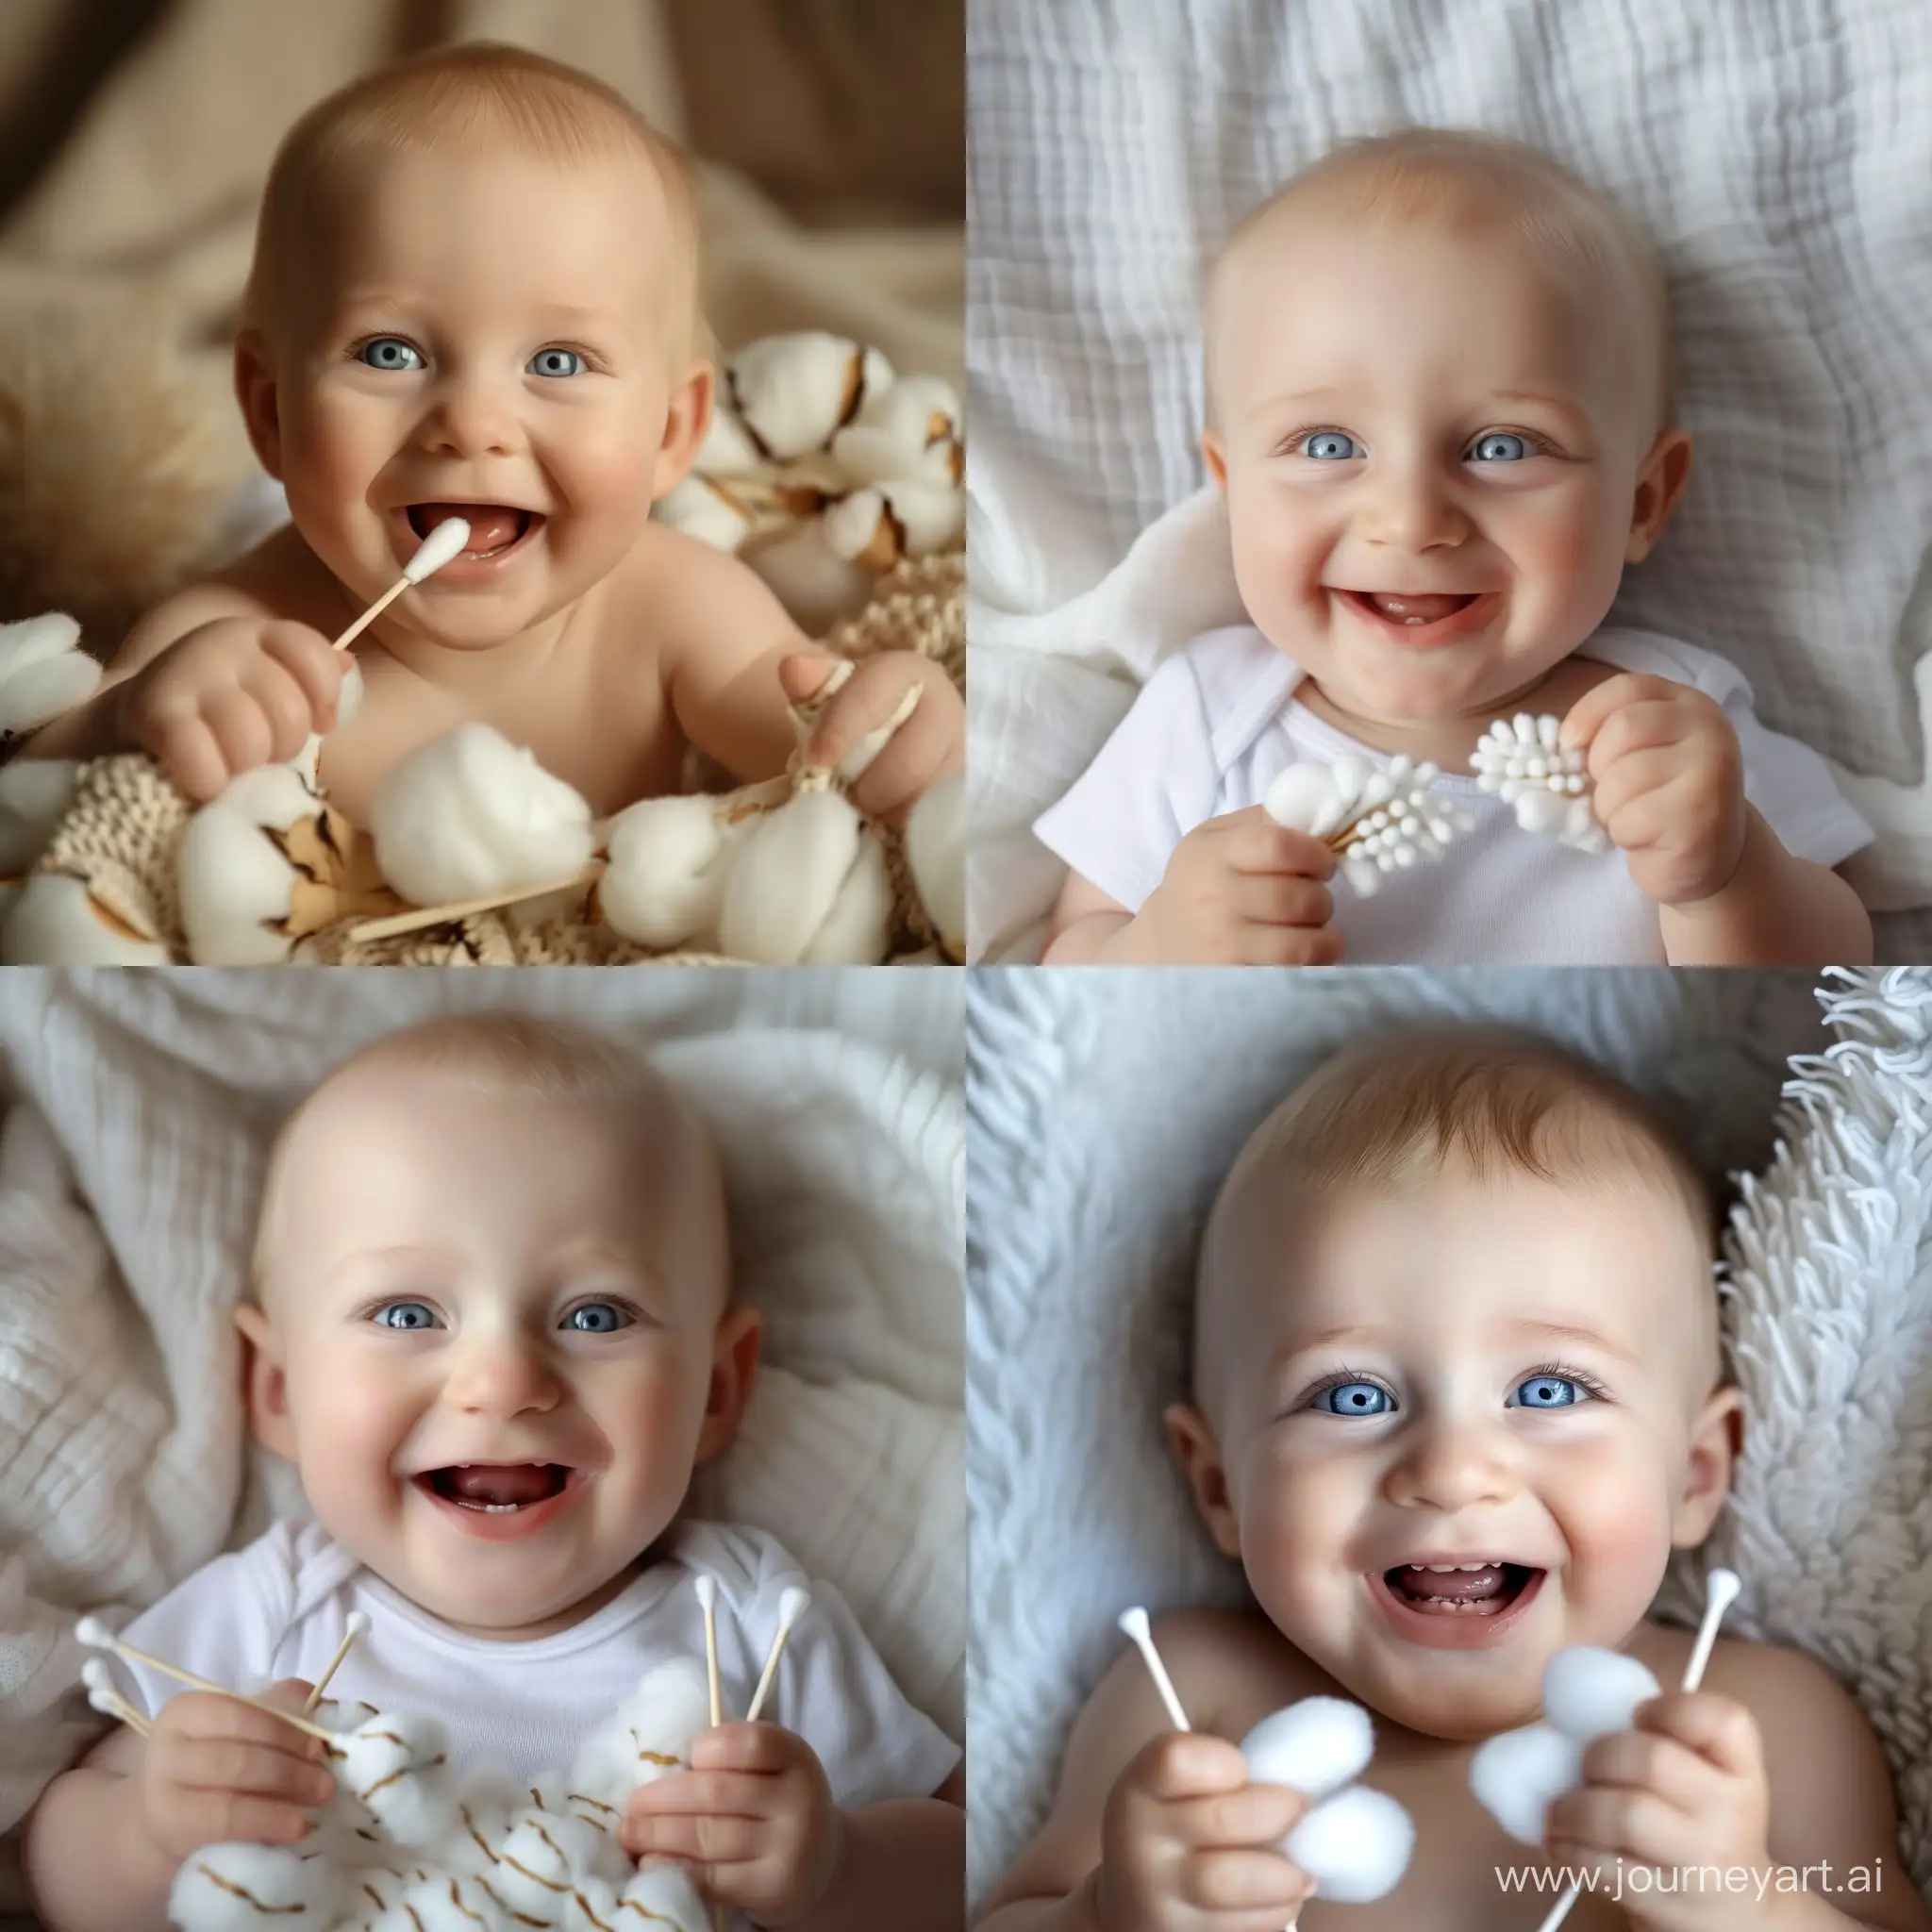 Adorable-6MonthOld-Blandine-Smiling-with-Cute-Cotton-Swabs